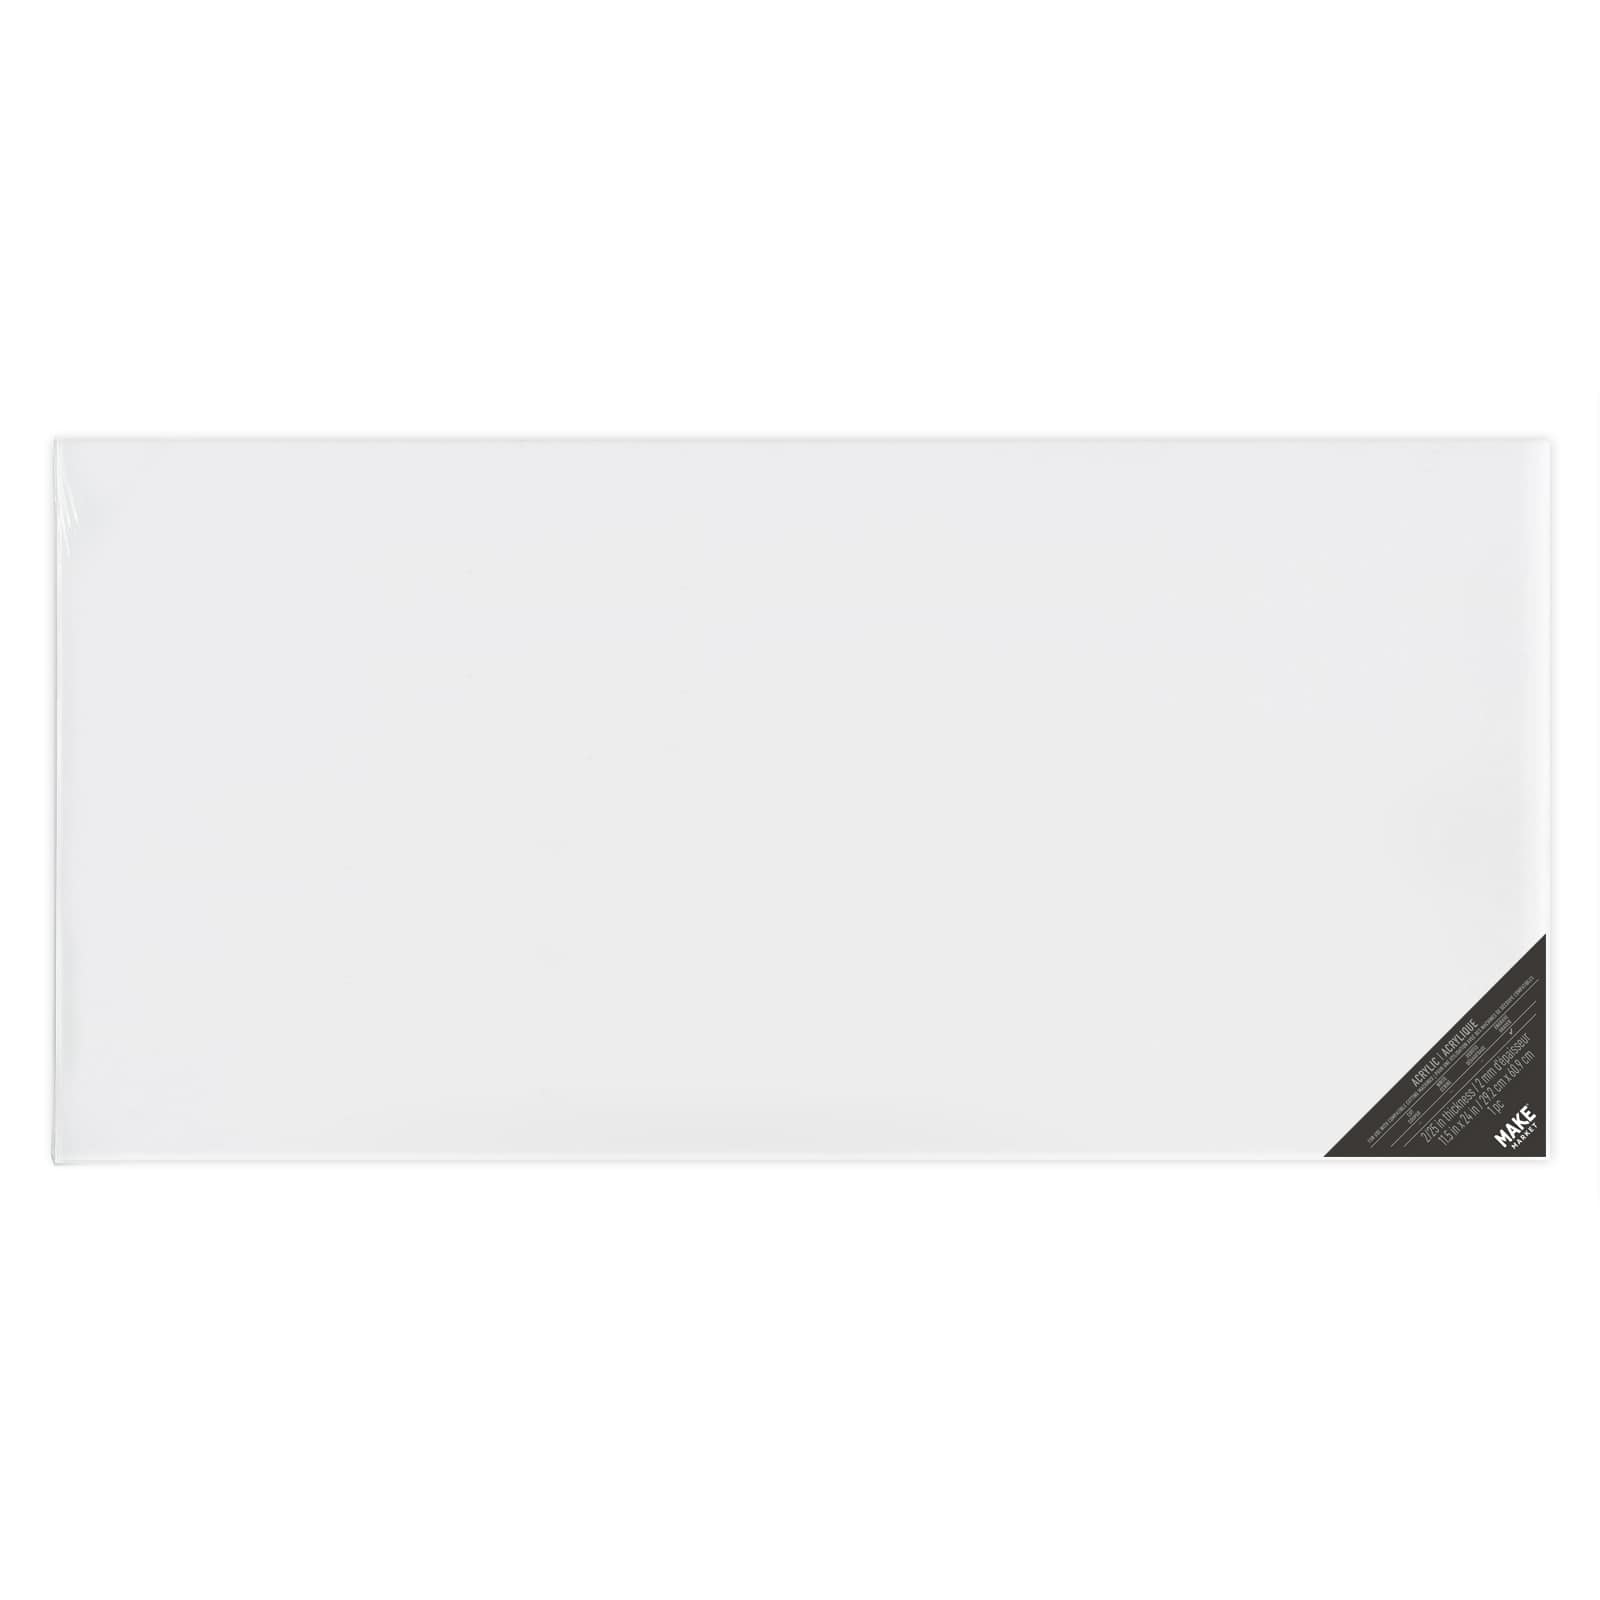 Clear Acrylic Craft Sheet by Make Market®